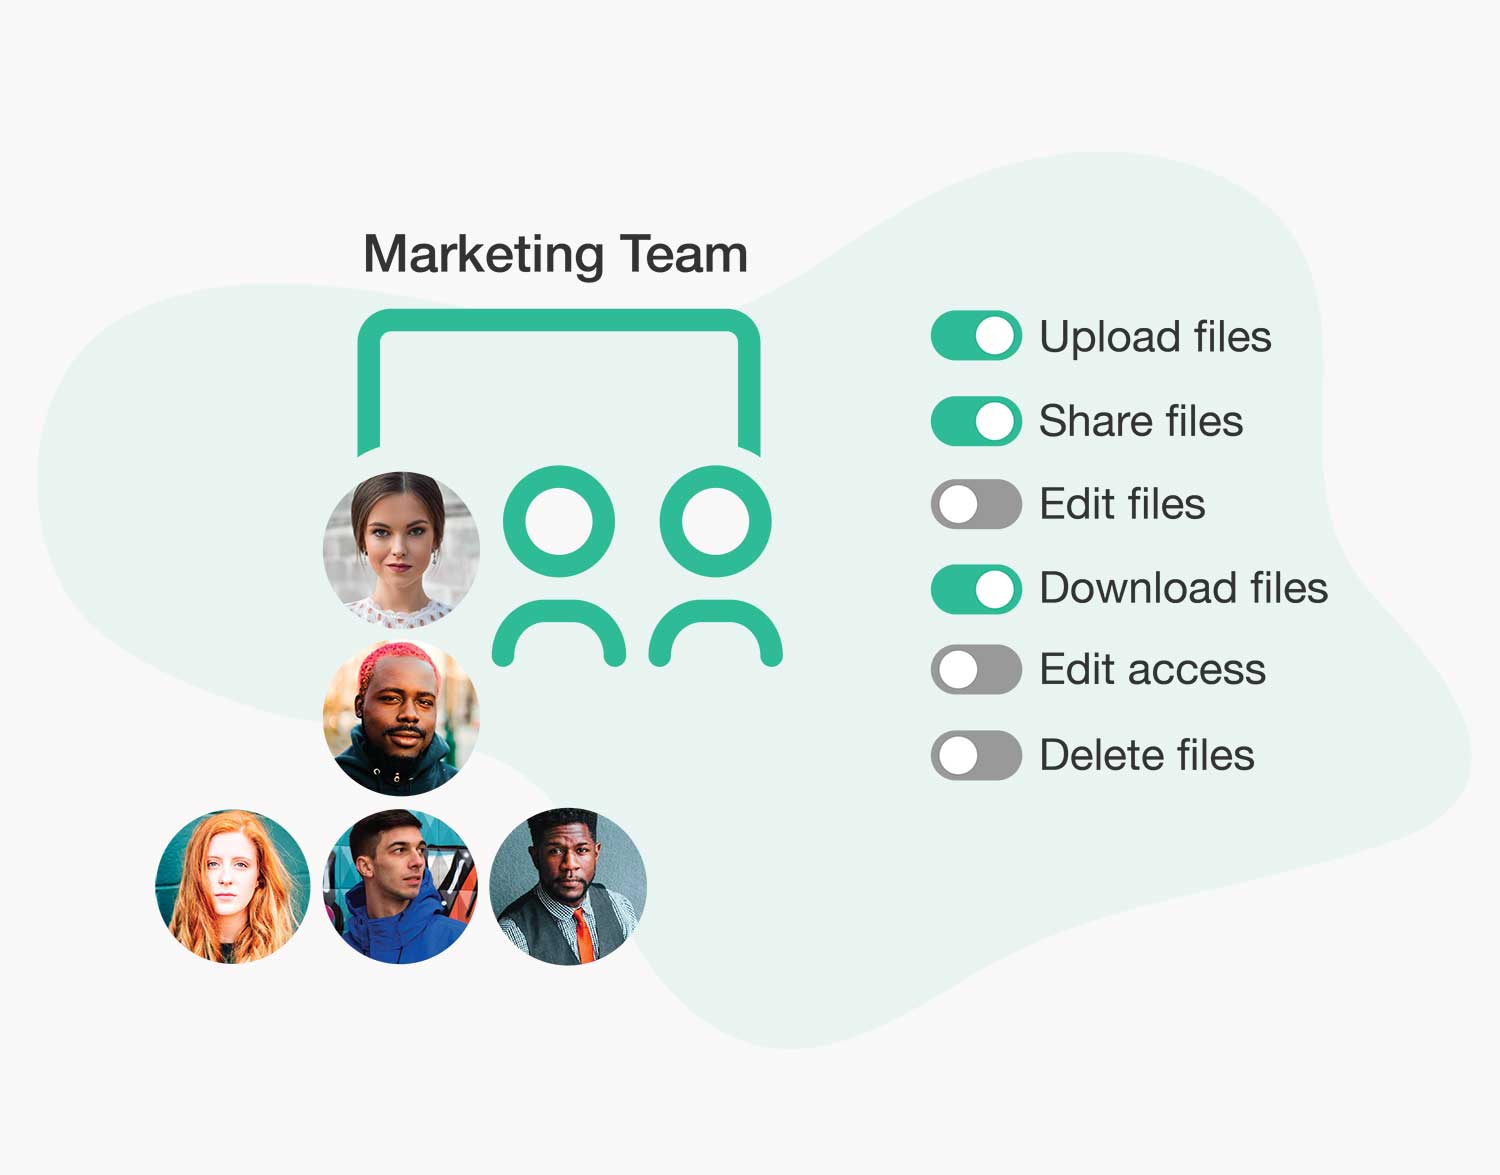 User roles and teams